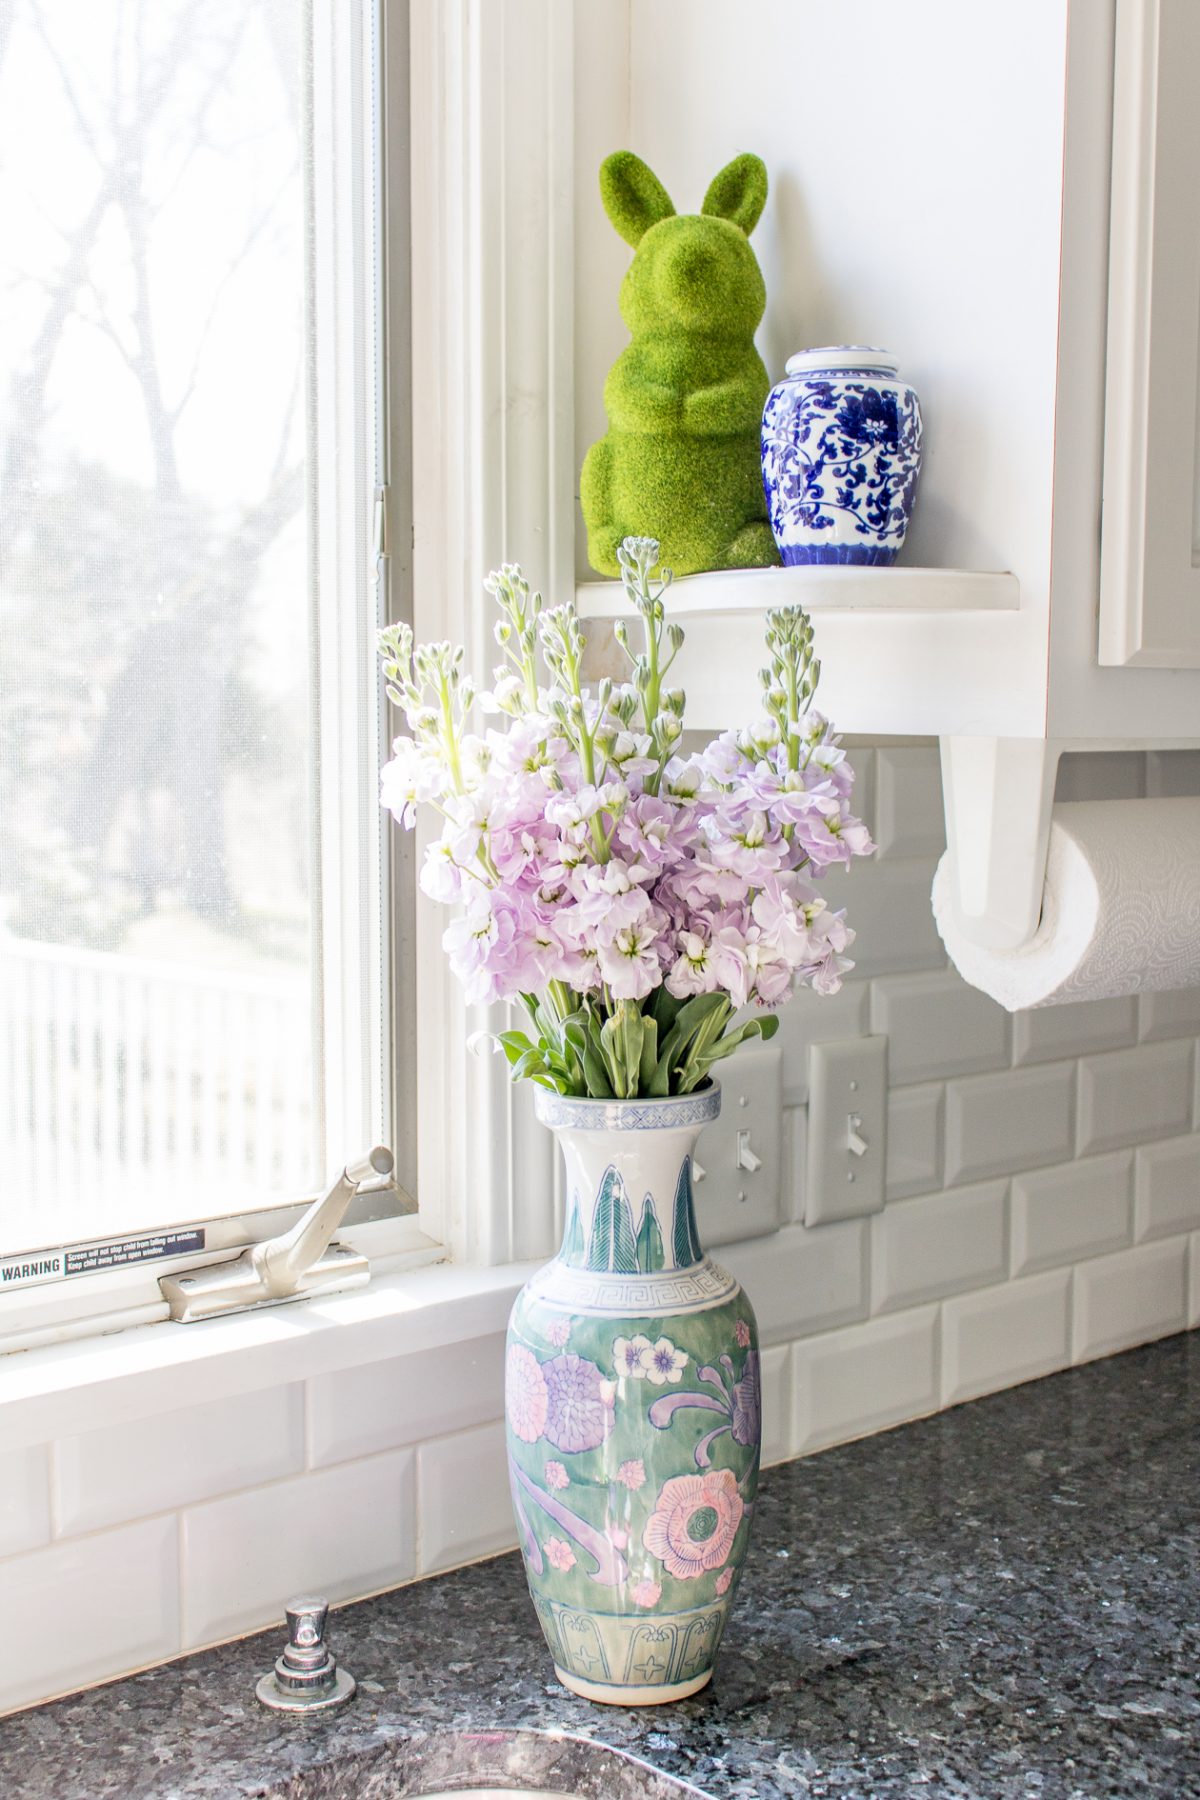 Green Moss Bunny, Blue Ginger Jar, Pastel Vase with Purple Flowers on Kitchen Counter